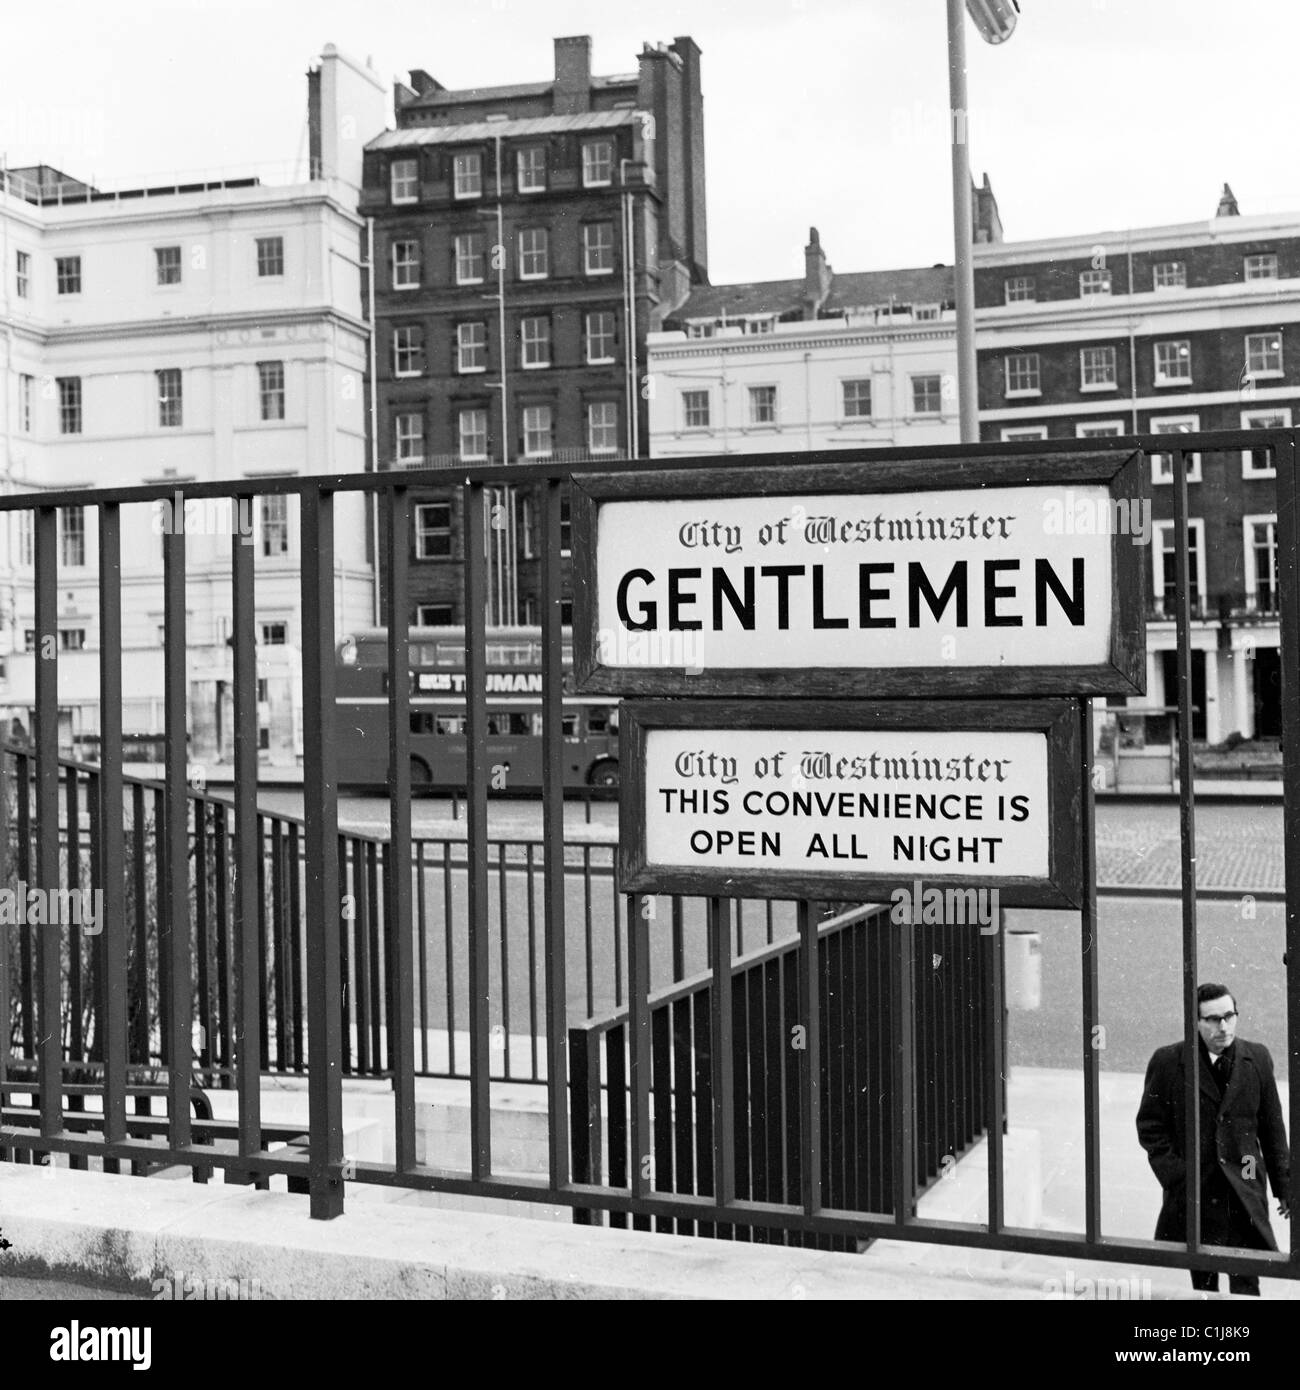 London, 1960s, a sign on a stairway railing indicating a public toilet for gentlemen in the City of Westminster, a convenience that is open all night. Stock Photo